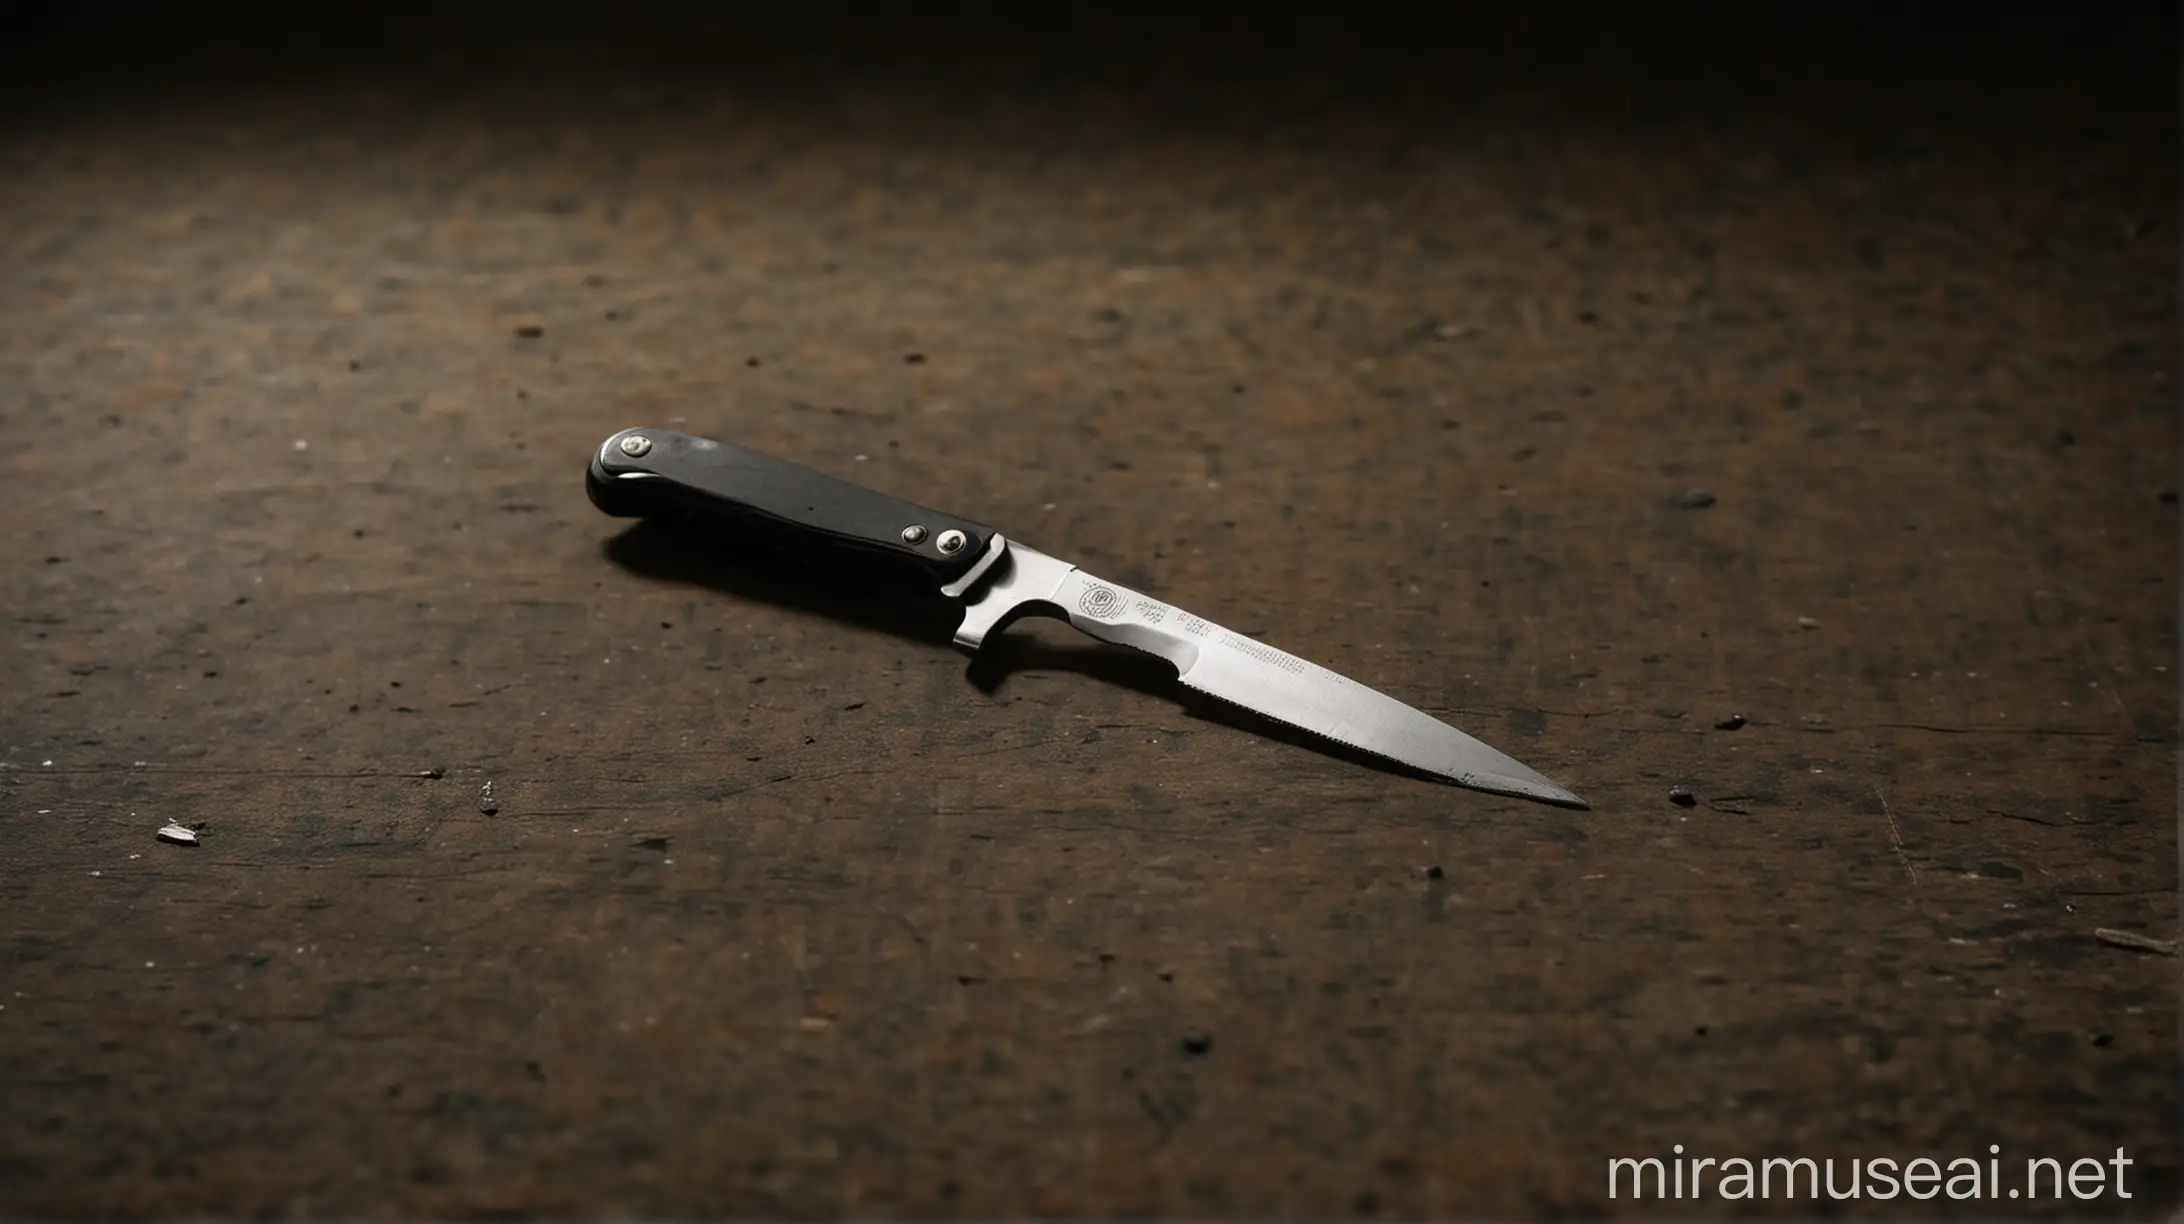 clear focus on sharp knife on floor, capture with dslr canon, 50mm lense, dark scene, two shadow in background